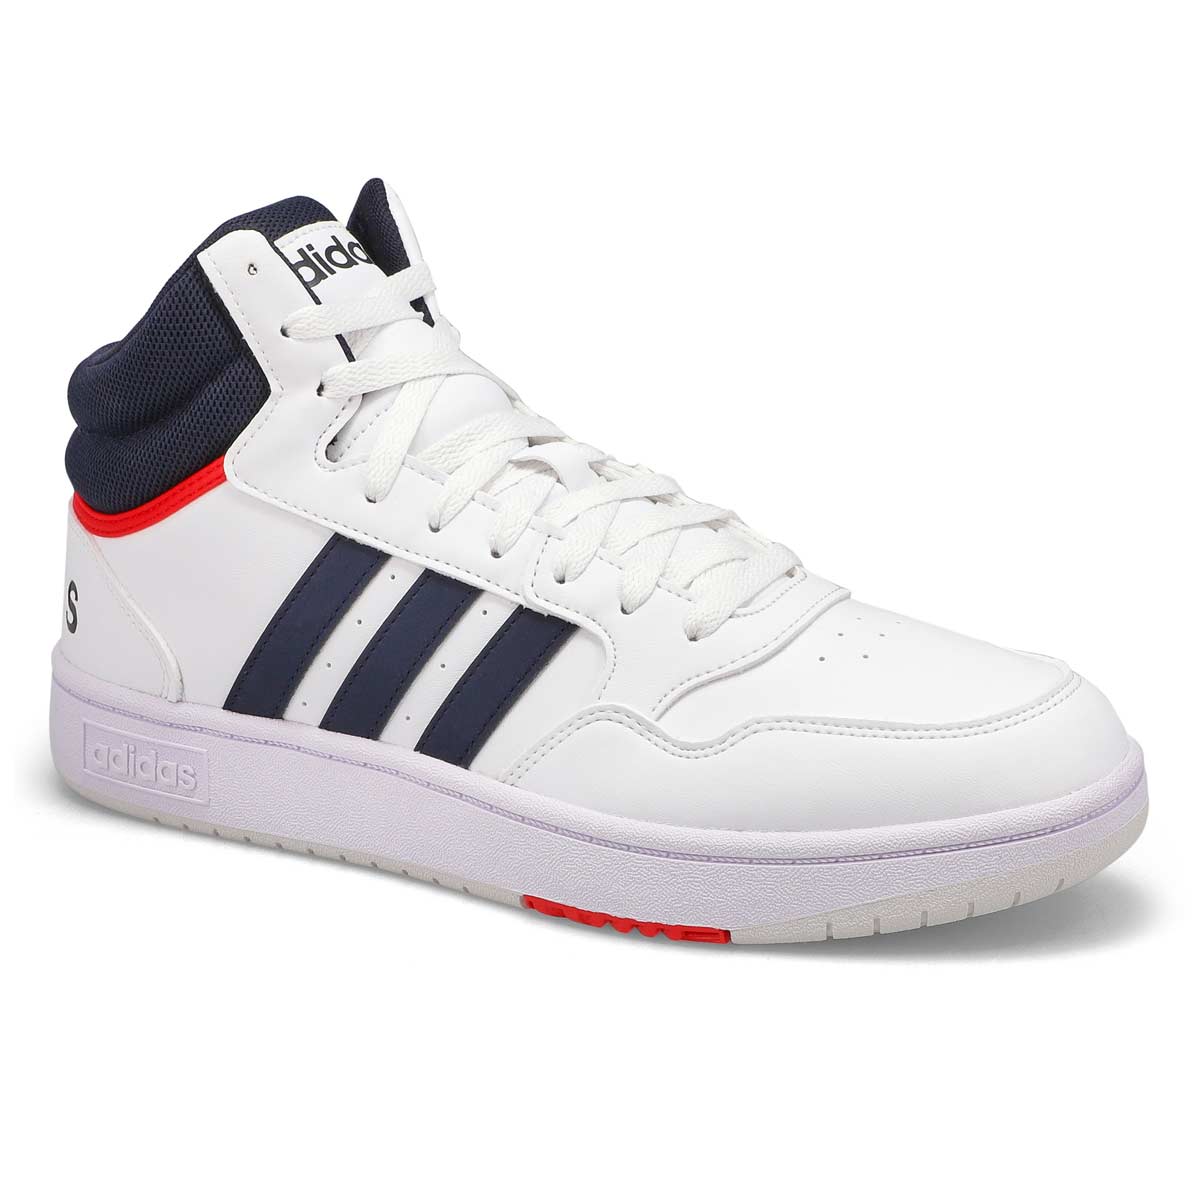 Men's Hoops 3.0 Mid Lace Up Sneaker - White/Ink/Red